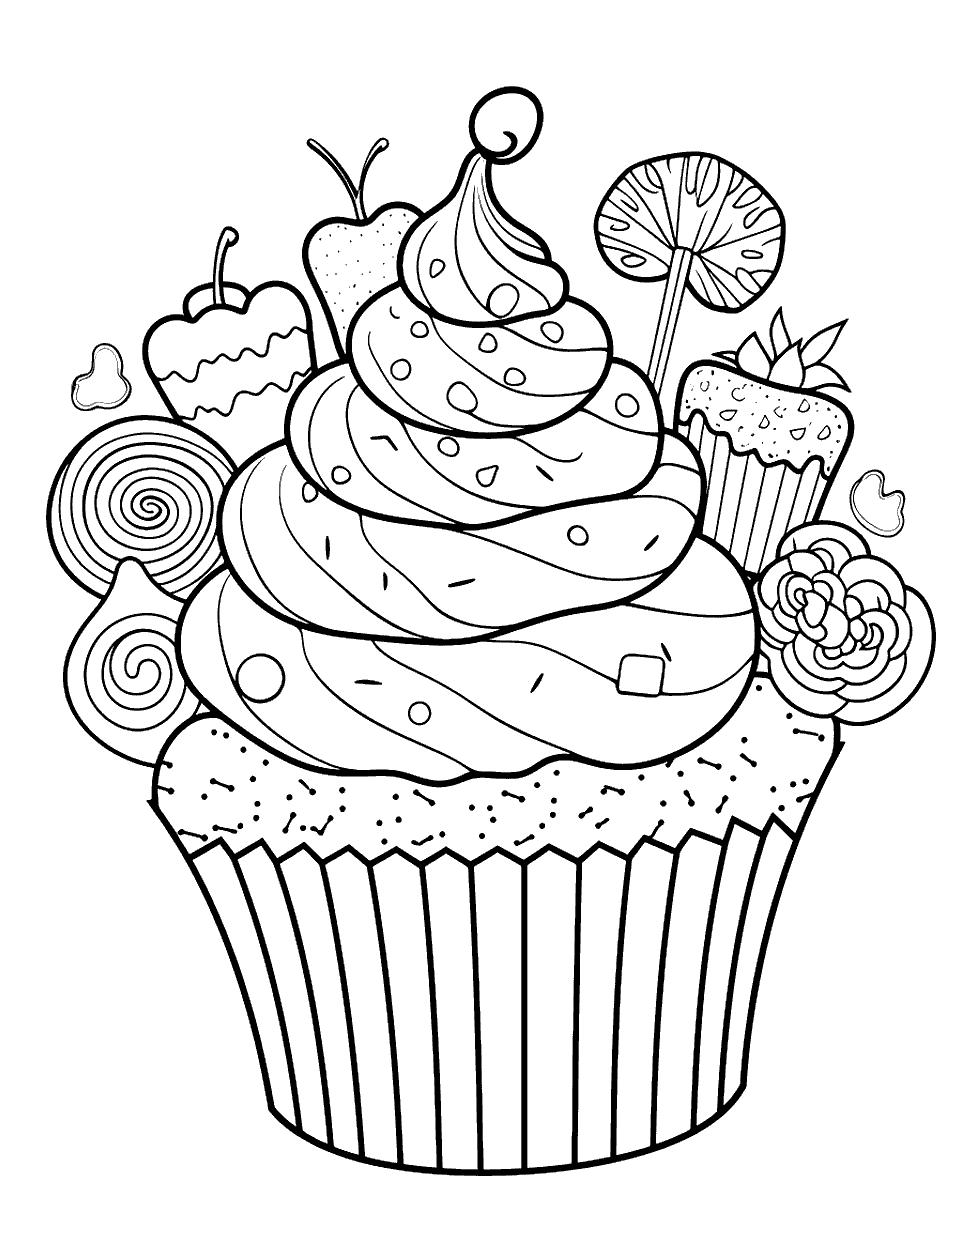 Candy Wonderland Cupcake Coloring Page - A cupcake decorated with various types of candy.